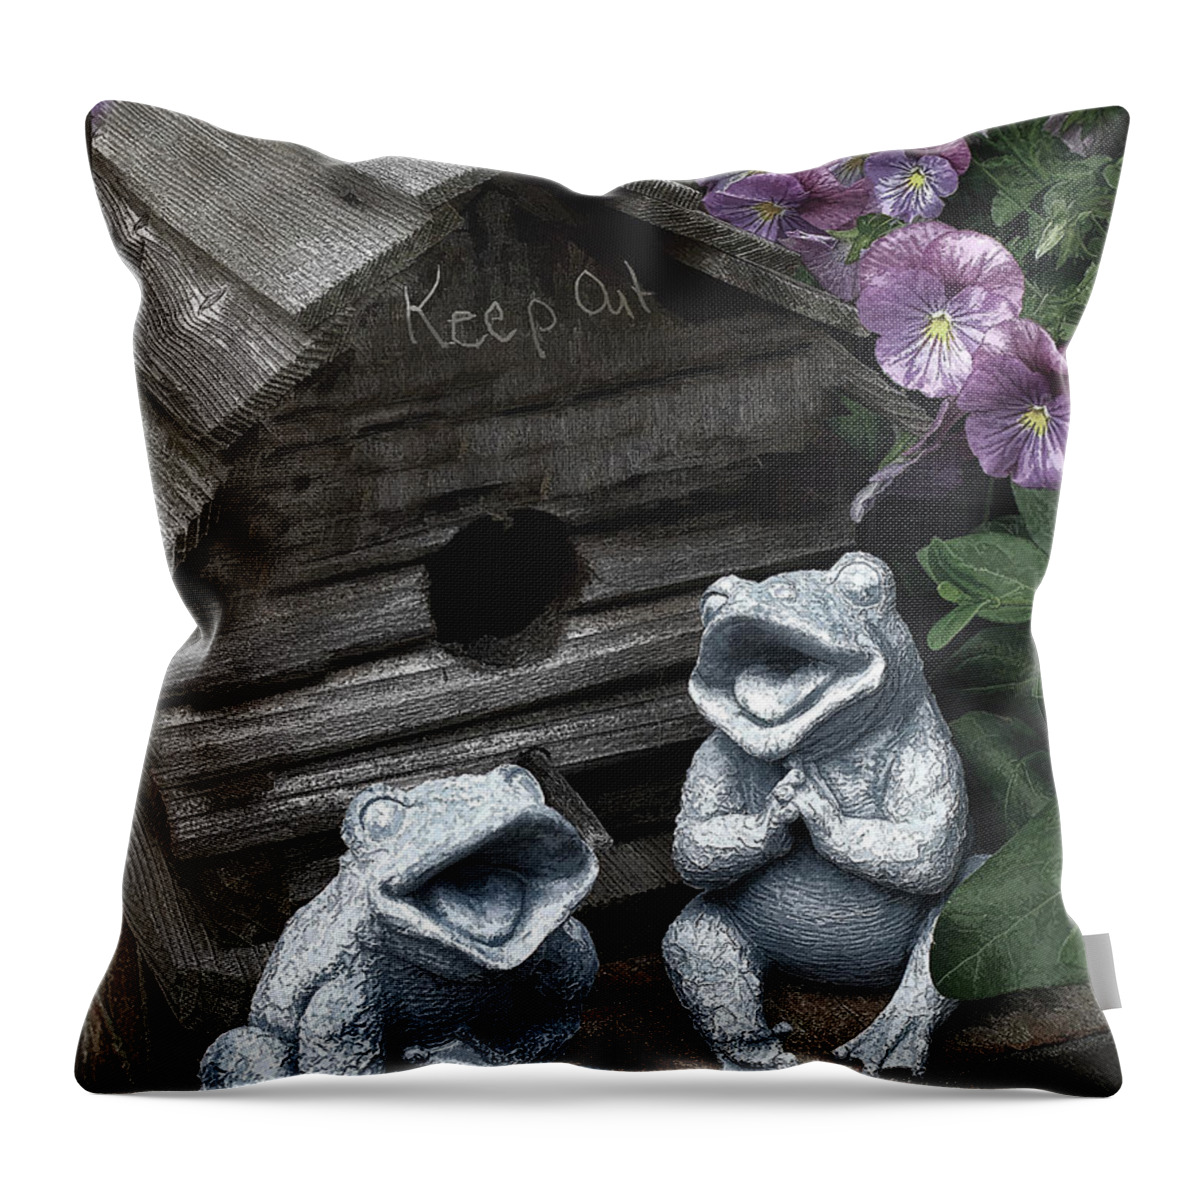 Birdhouse Throw Pillow featuring the photograph Birdhouse with Frogs by Bonnie Willis